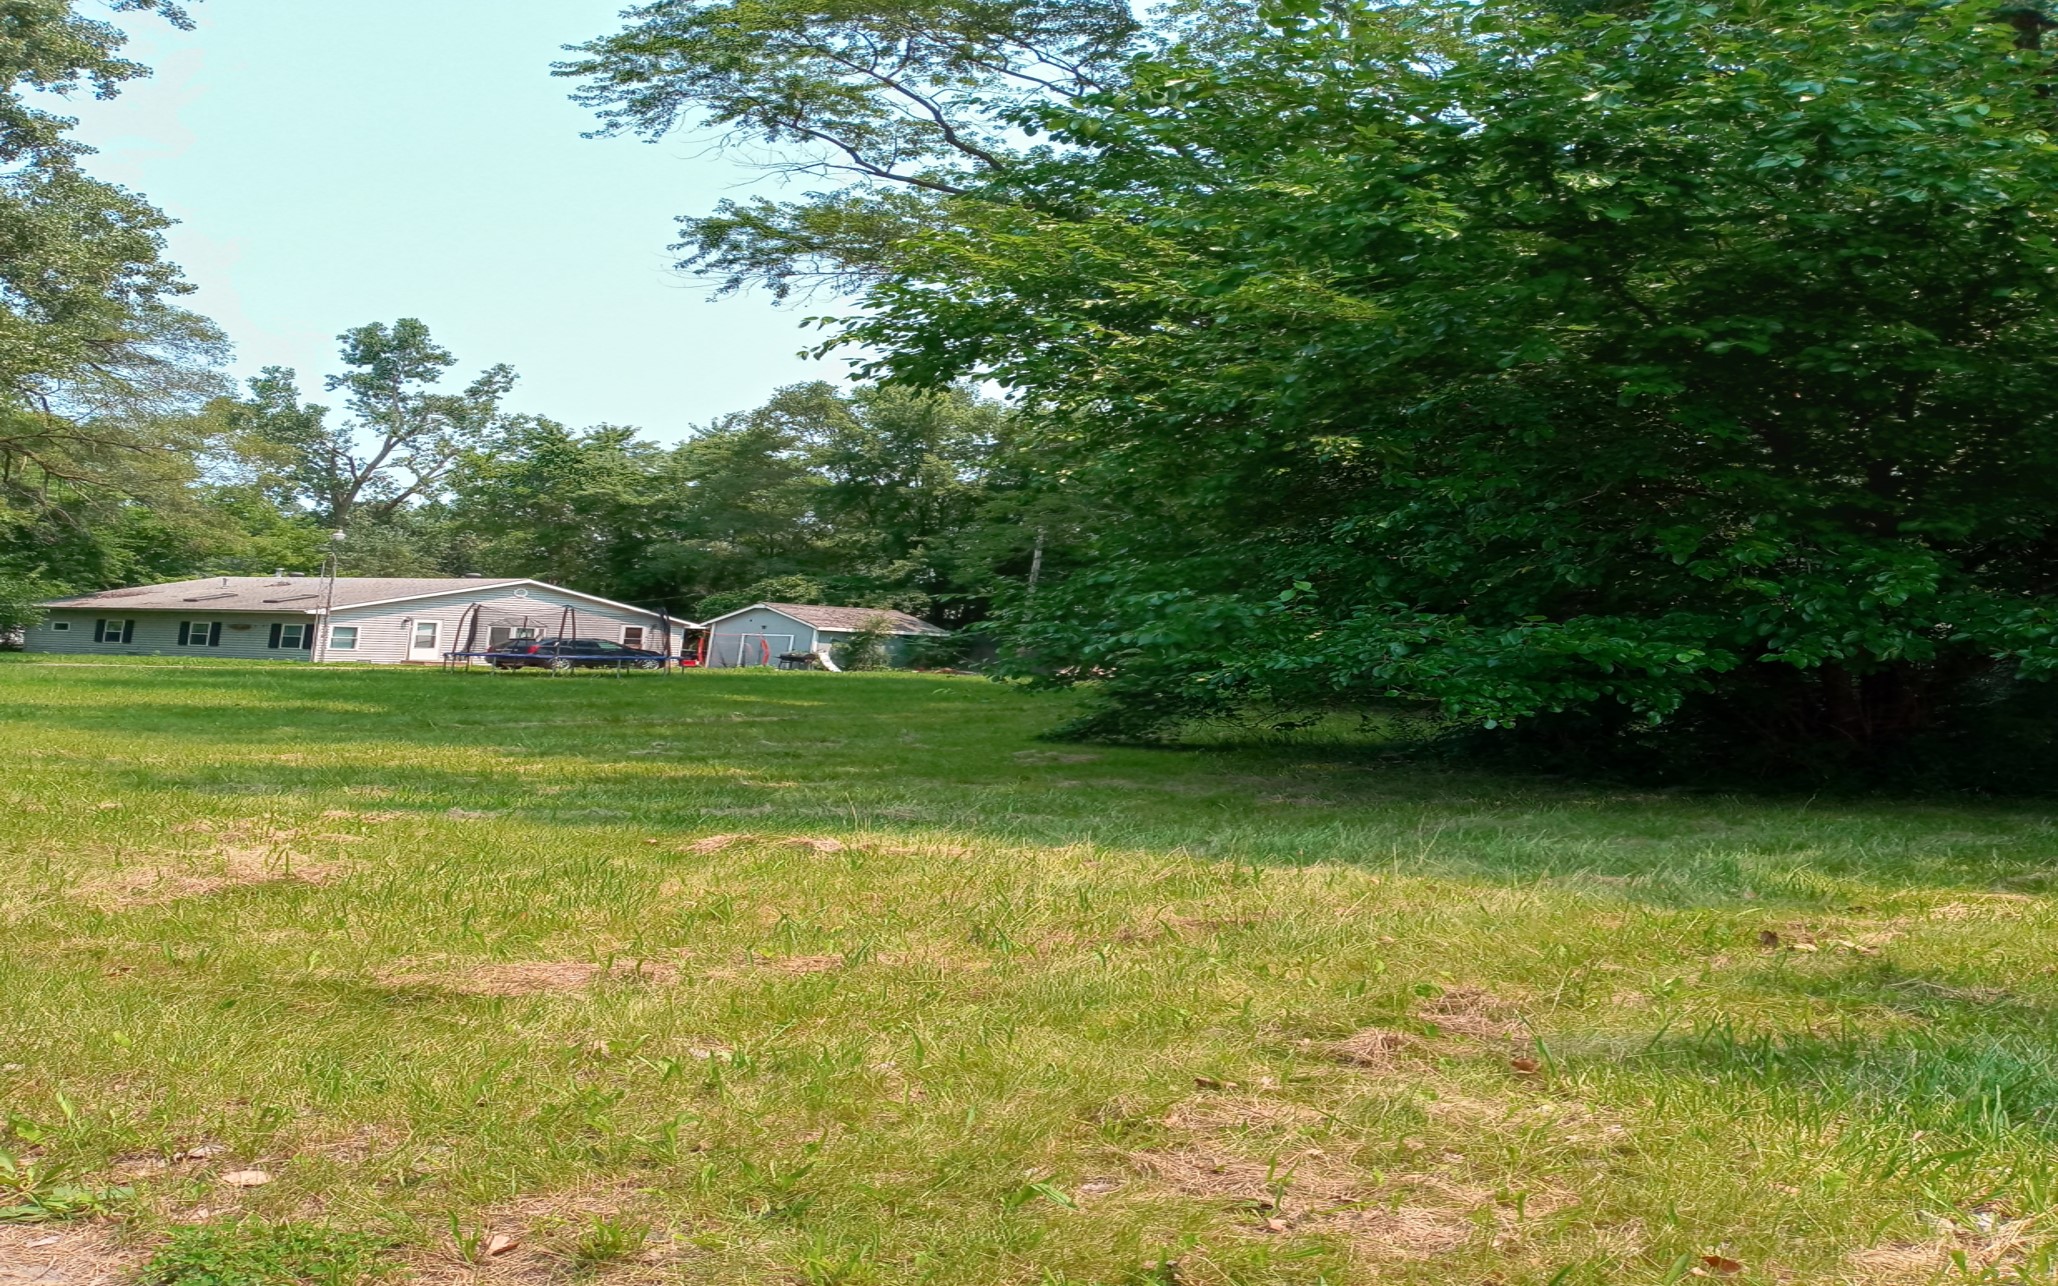 0.18 Acre Cleared and Close to the Indiana Dunes! Owner Financing Available